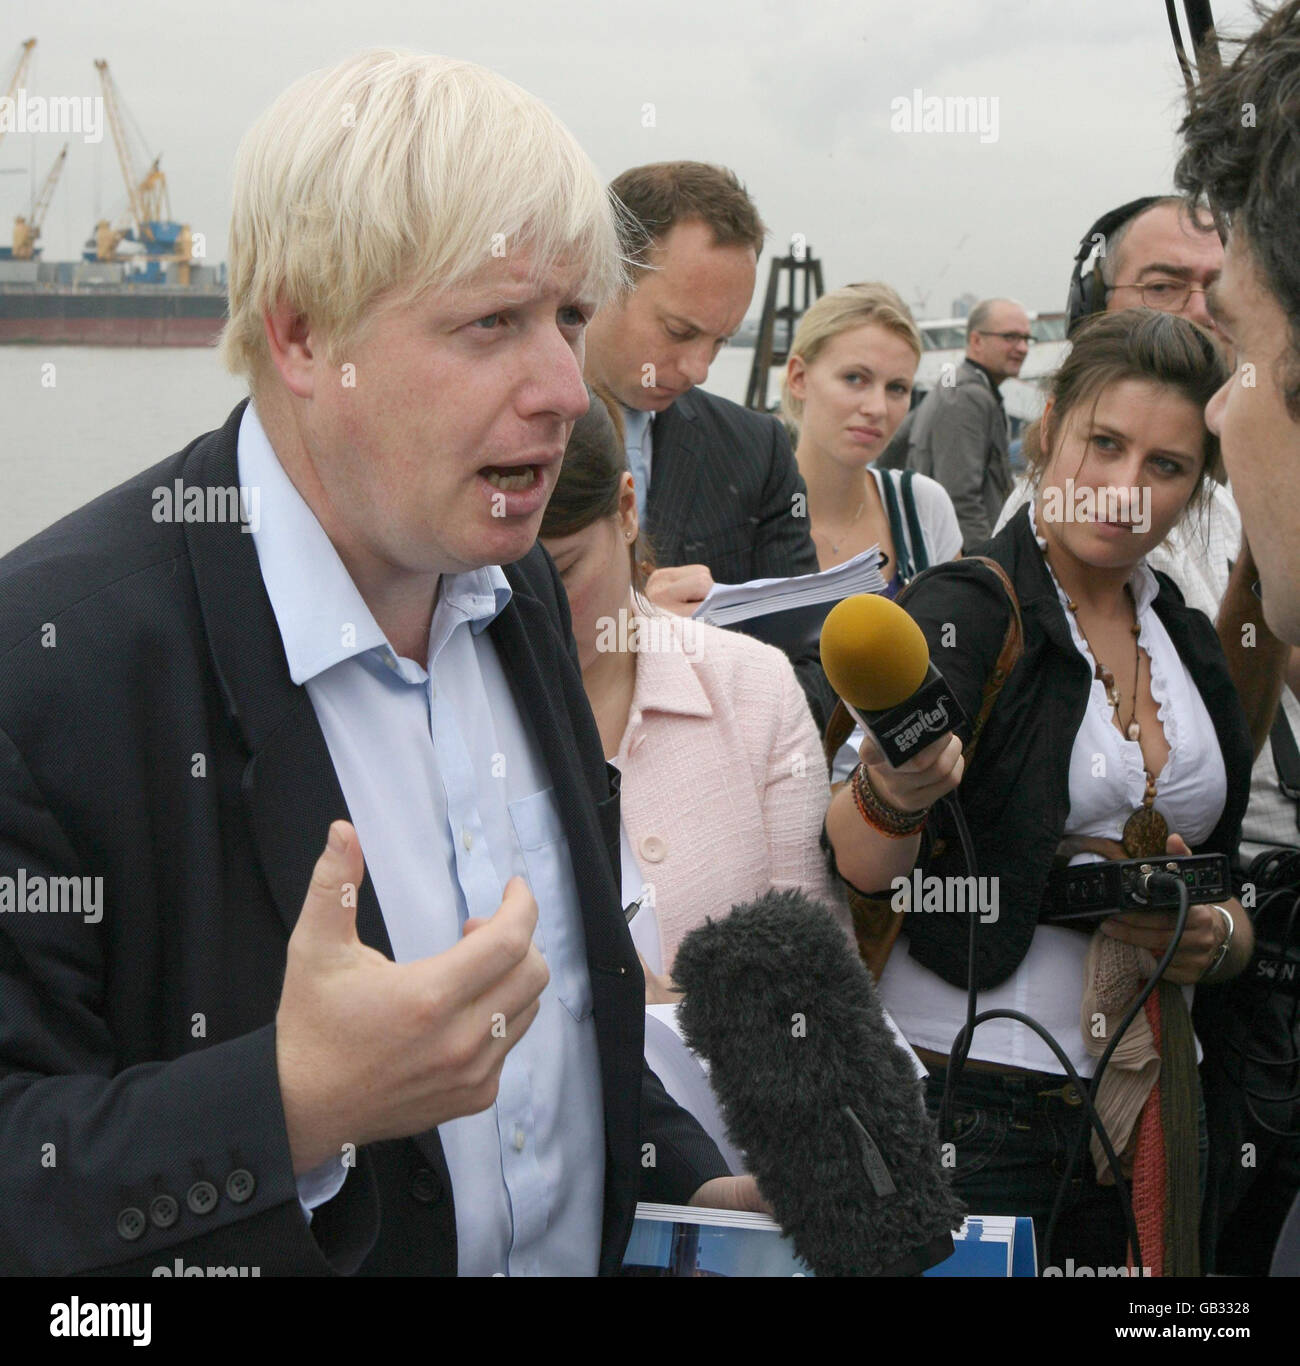 The Mayor of London Boris Johnson answers questions from the media as he launches London's Climate Change Adaptation Strategy by the Thames Barrier in east London. Stock Photo